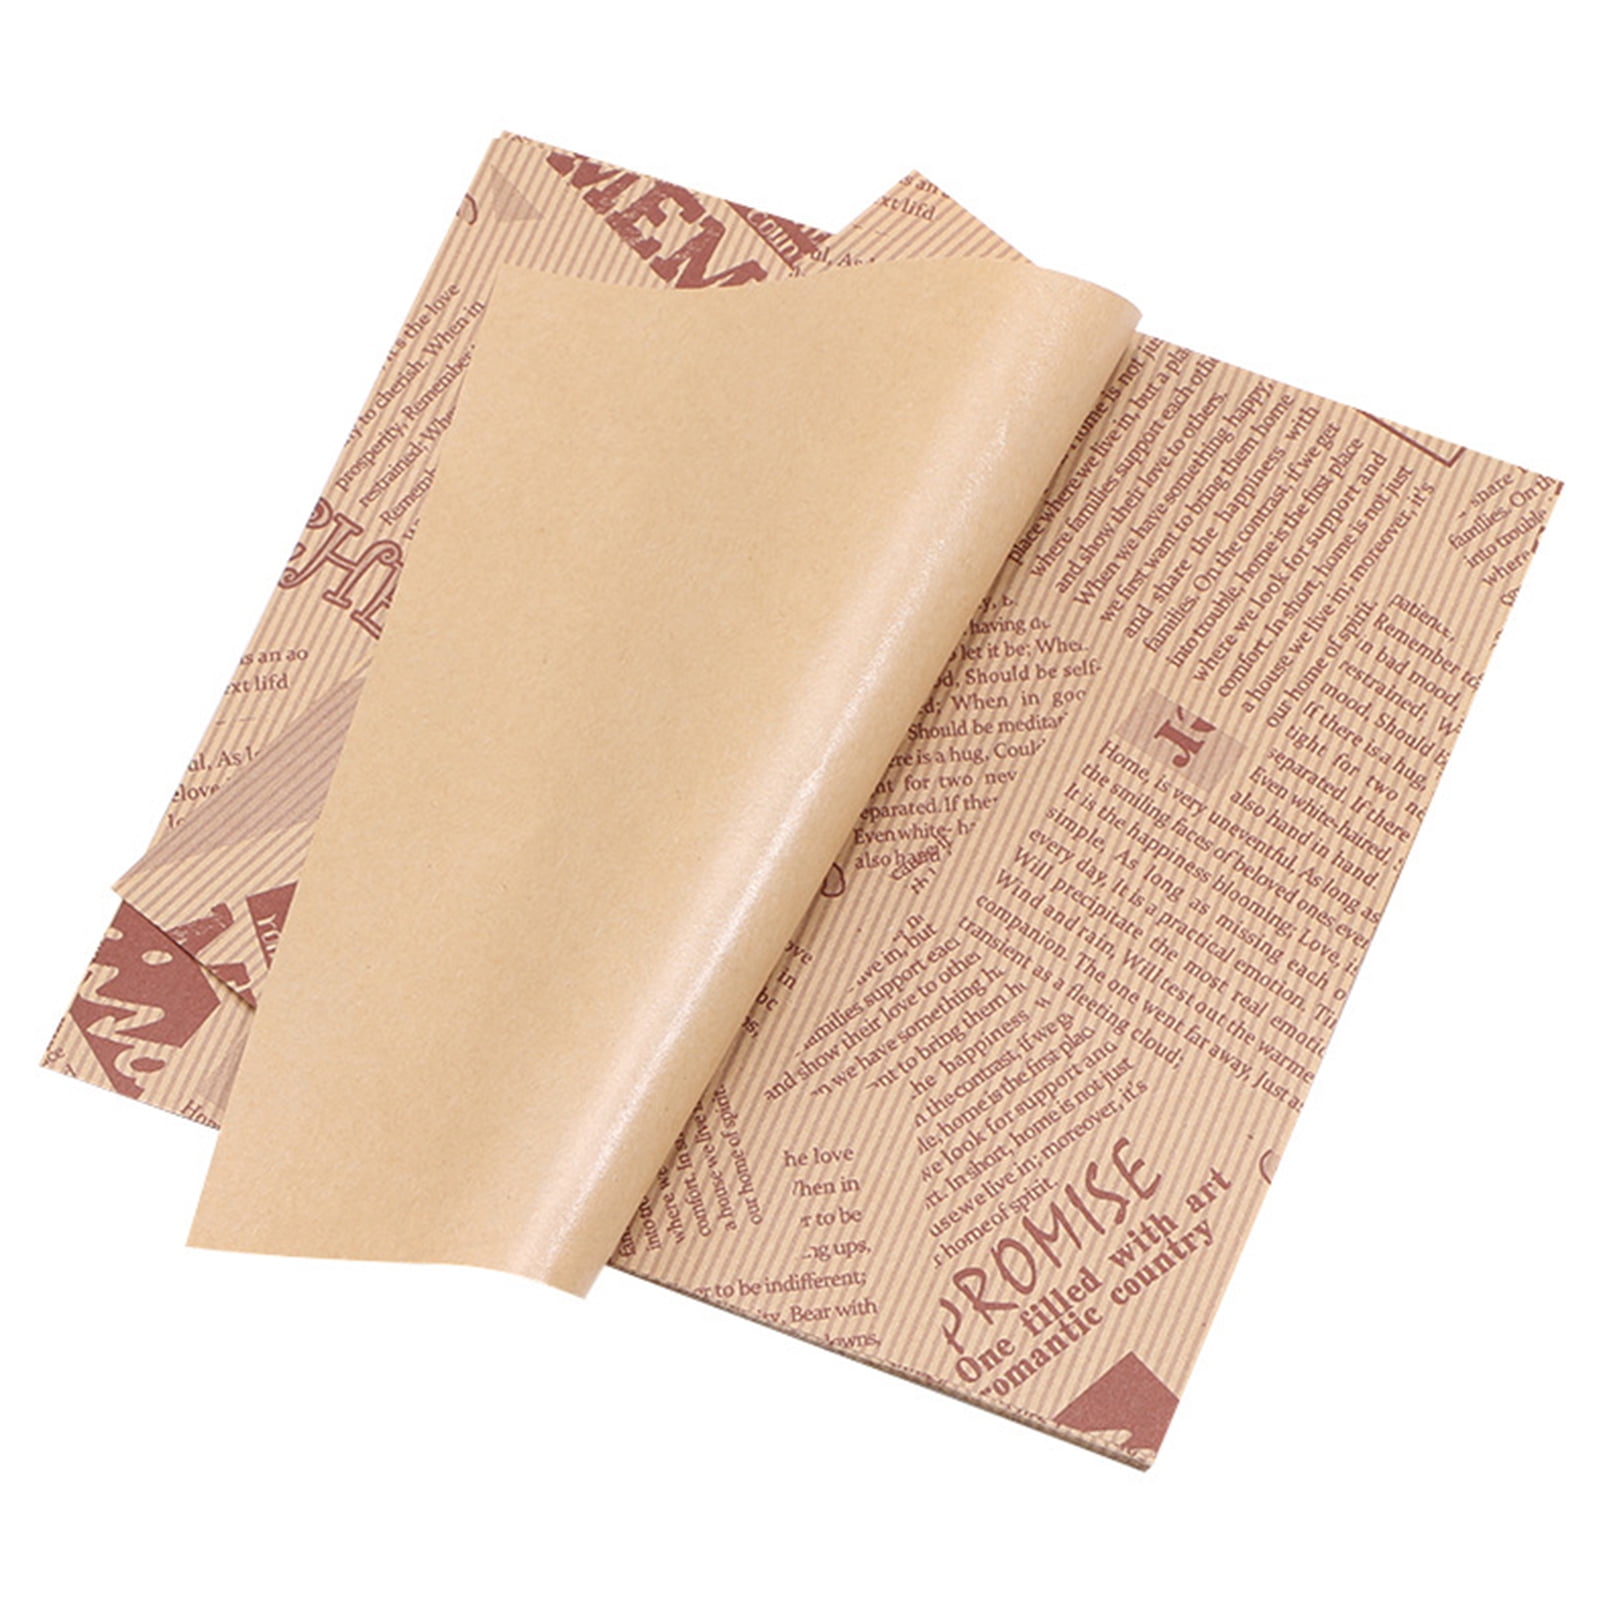 Grease Proof Liners 13.8 x 9.8 Deli Wrap 200 Pack. Best Kraft Food  Wrapping Paper Sheets for Picnic, Festival, Fair or BBQ. Perfect Liner for  Tray